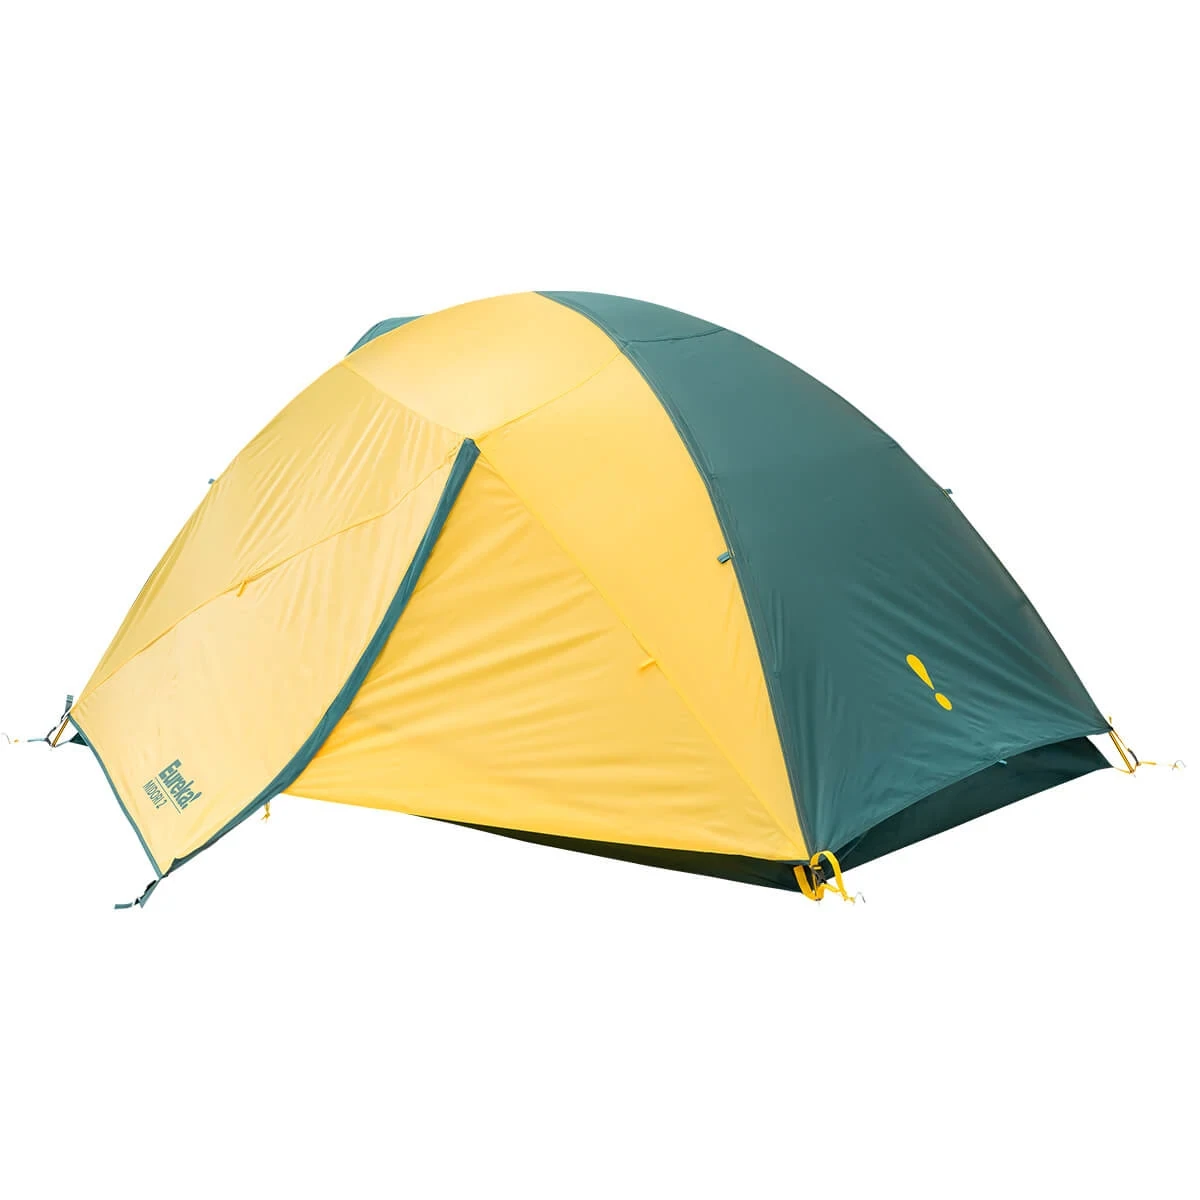 Midori 2 tent with rainfly on